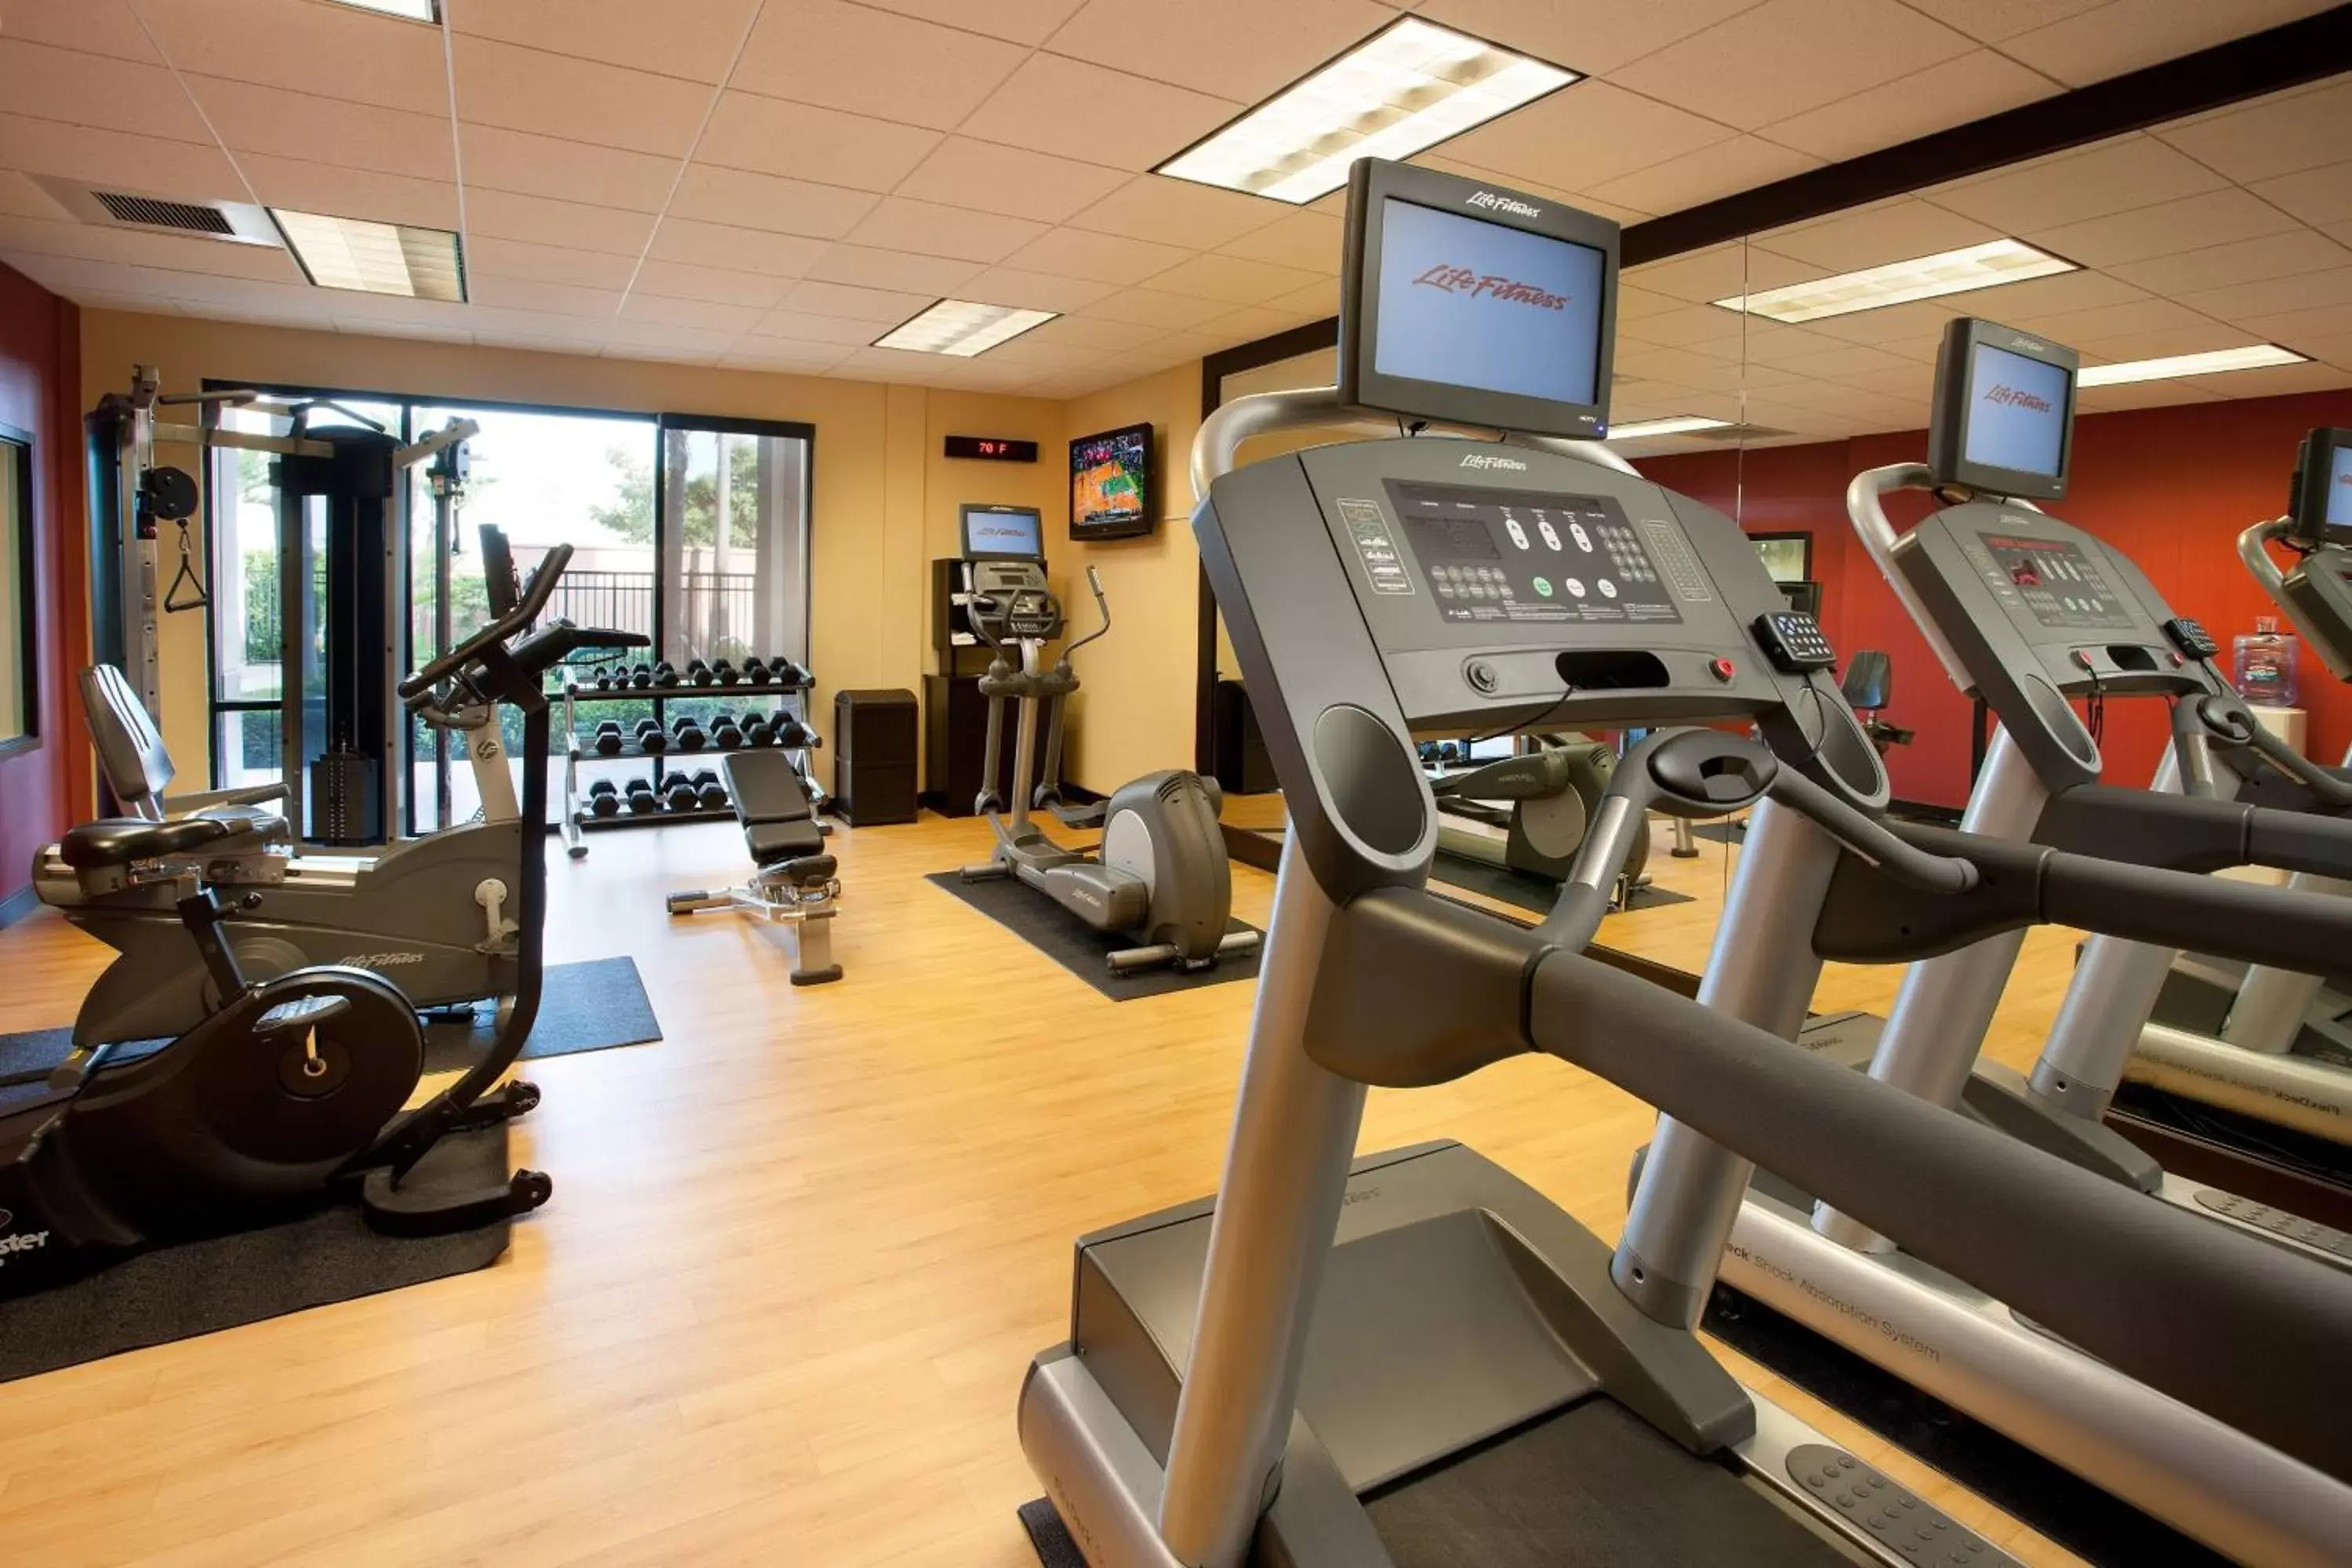 Fitness centre/facilities, Fitness Center/Facilities in Courtyard Foothill Ranch Irvine East/Lake Forest